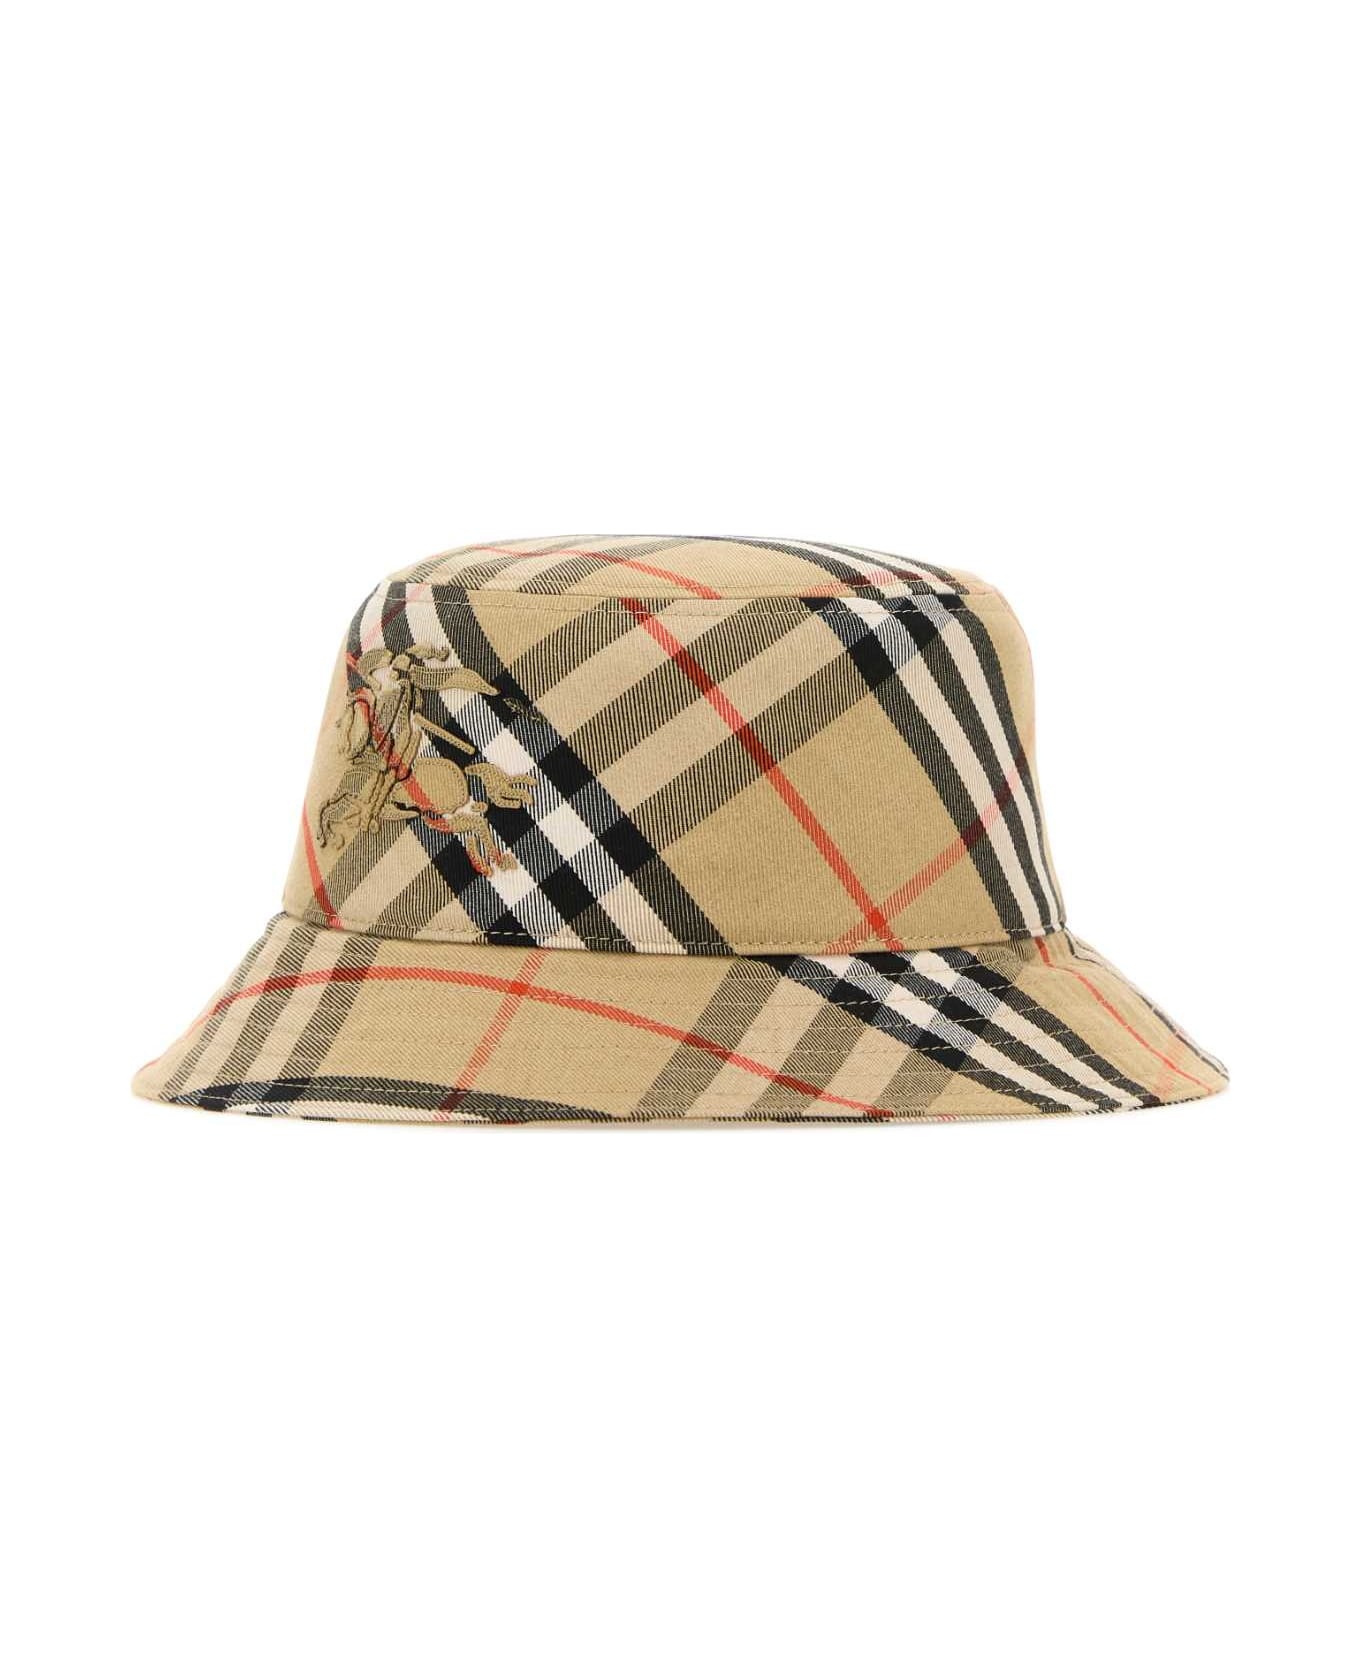 Burberry Printed Polyester Blend Bucket Hat - SAND